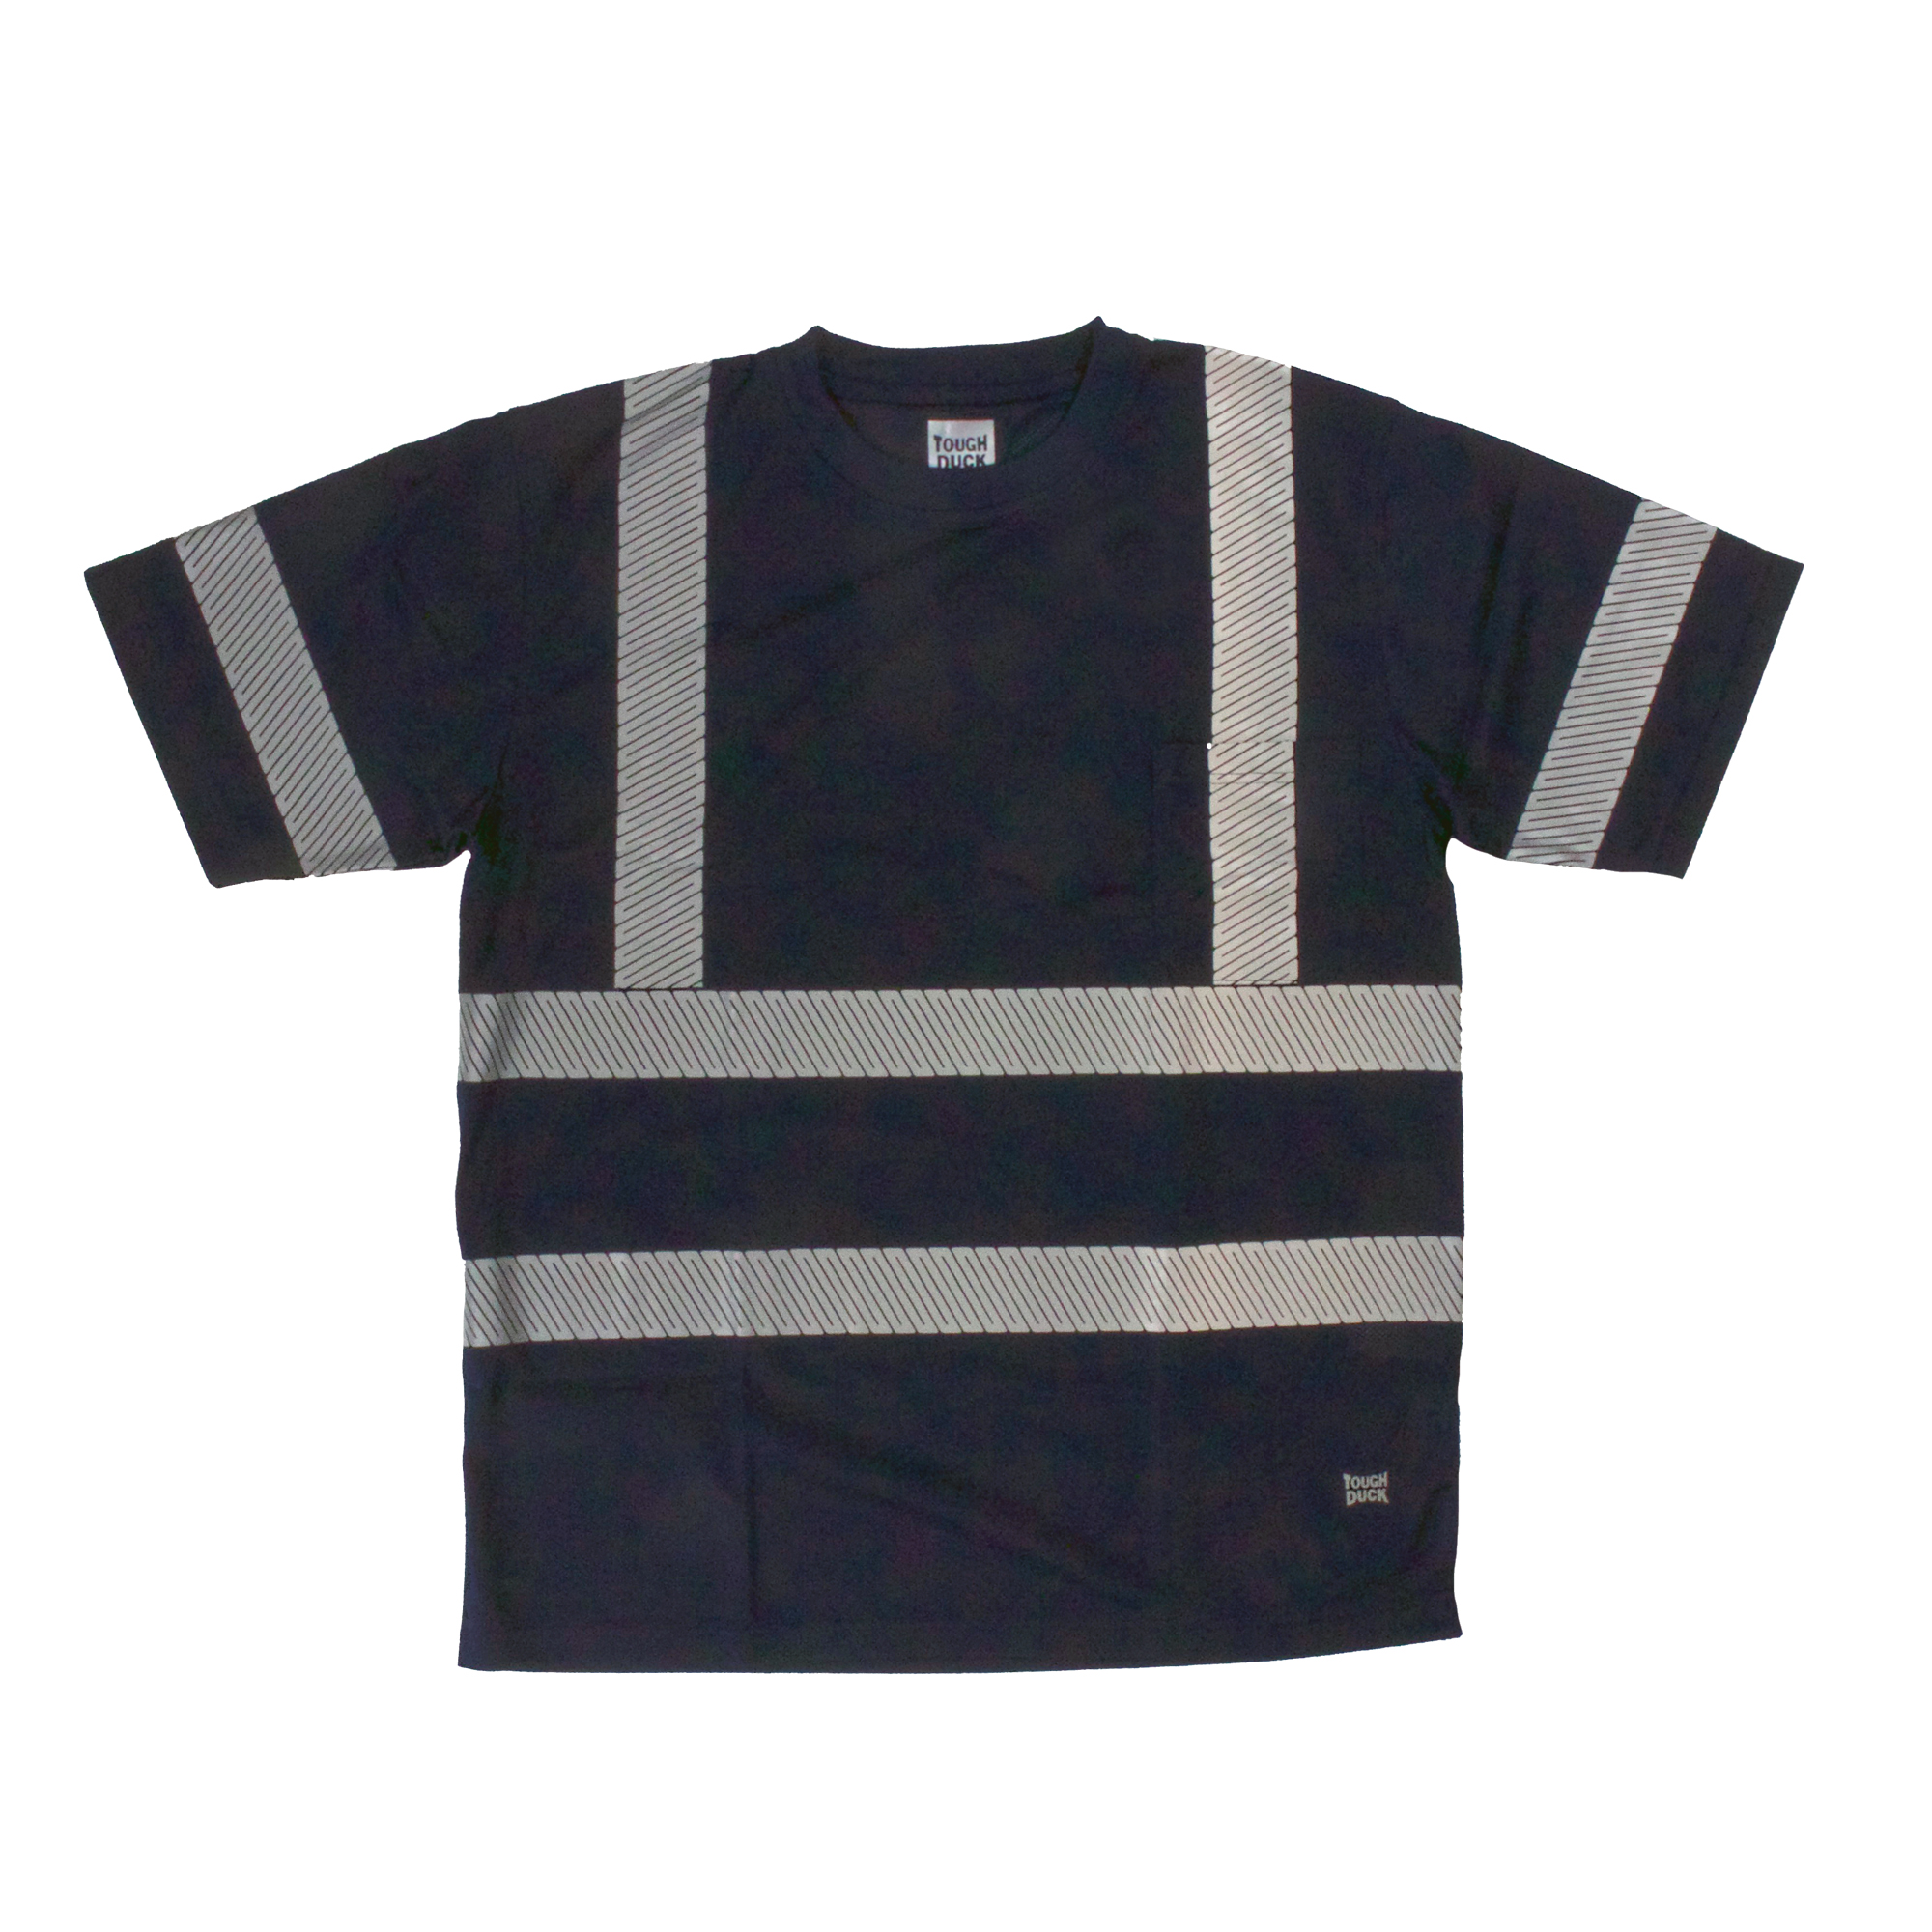 Picture of Tough Duck ST07 S/S SAFETY T-SHIRT